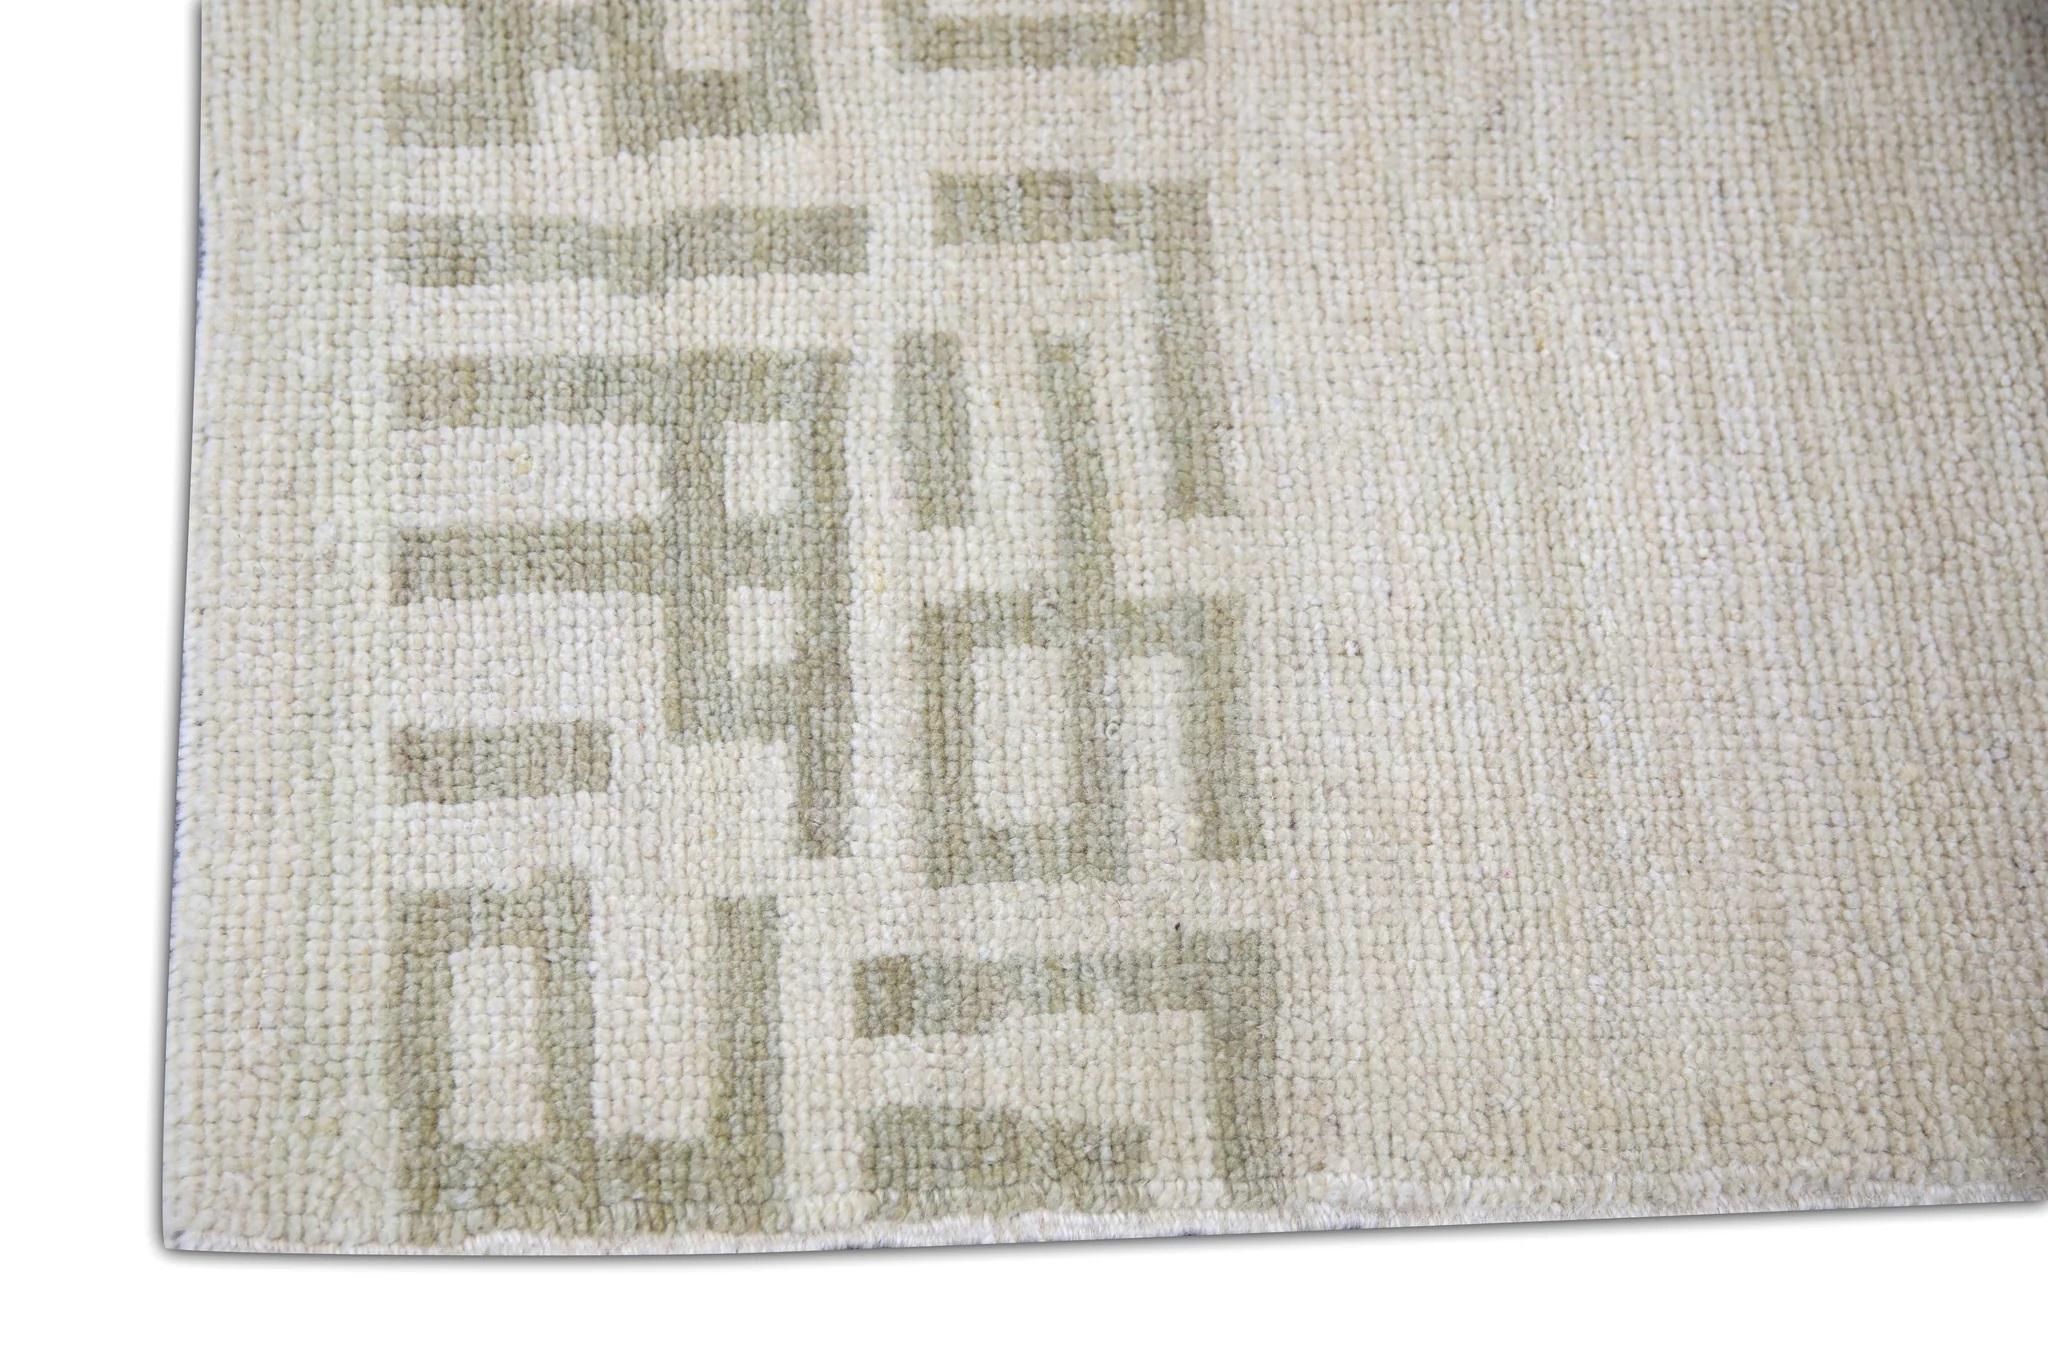 Vegetable Dyed Cream and Taupe Handwoven Turkish Oushak Rug in Geometric Tribal Pattern 3'3x5'2 For Sale